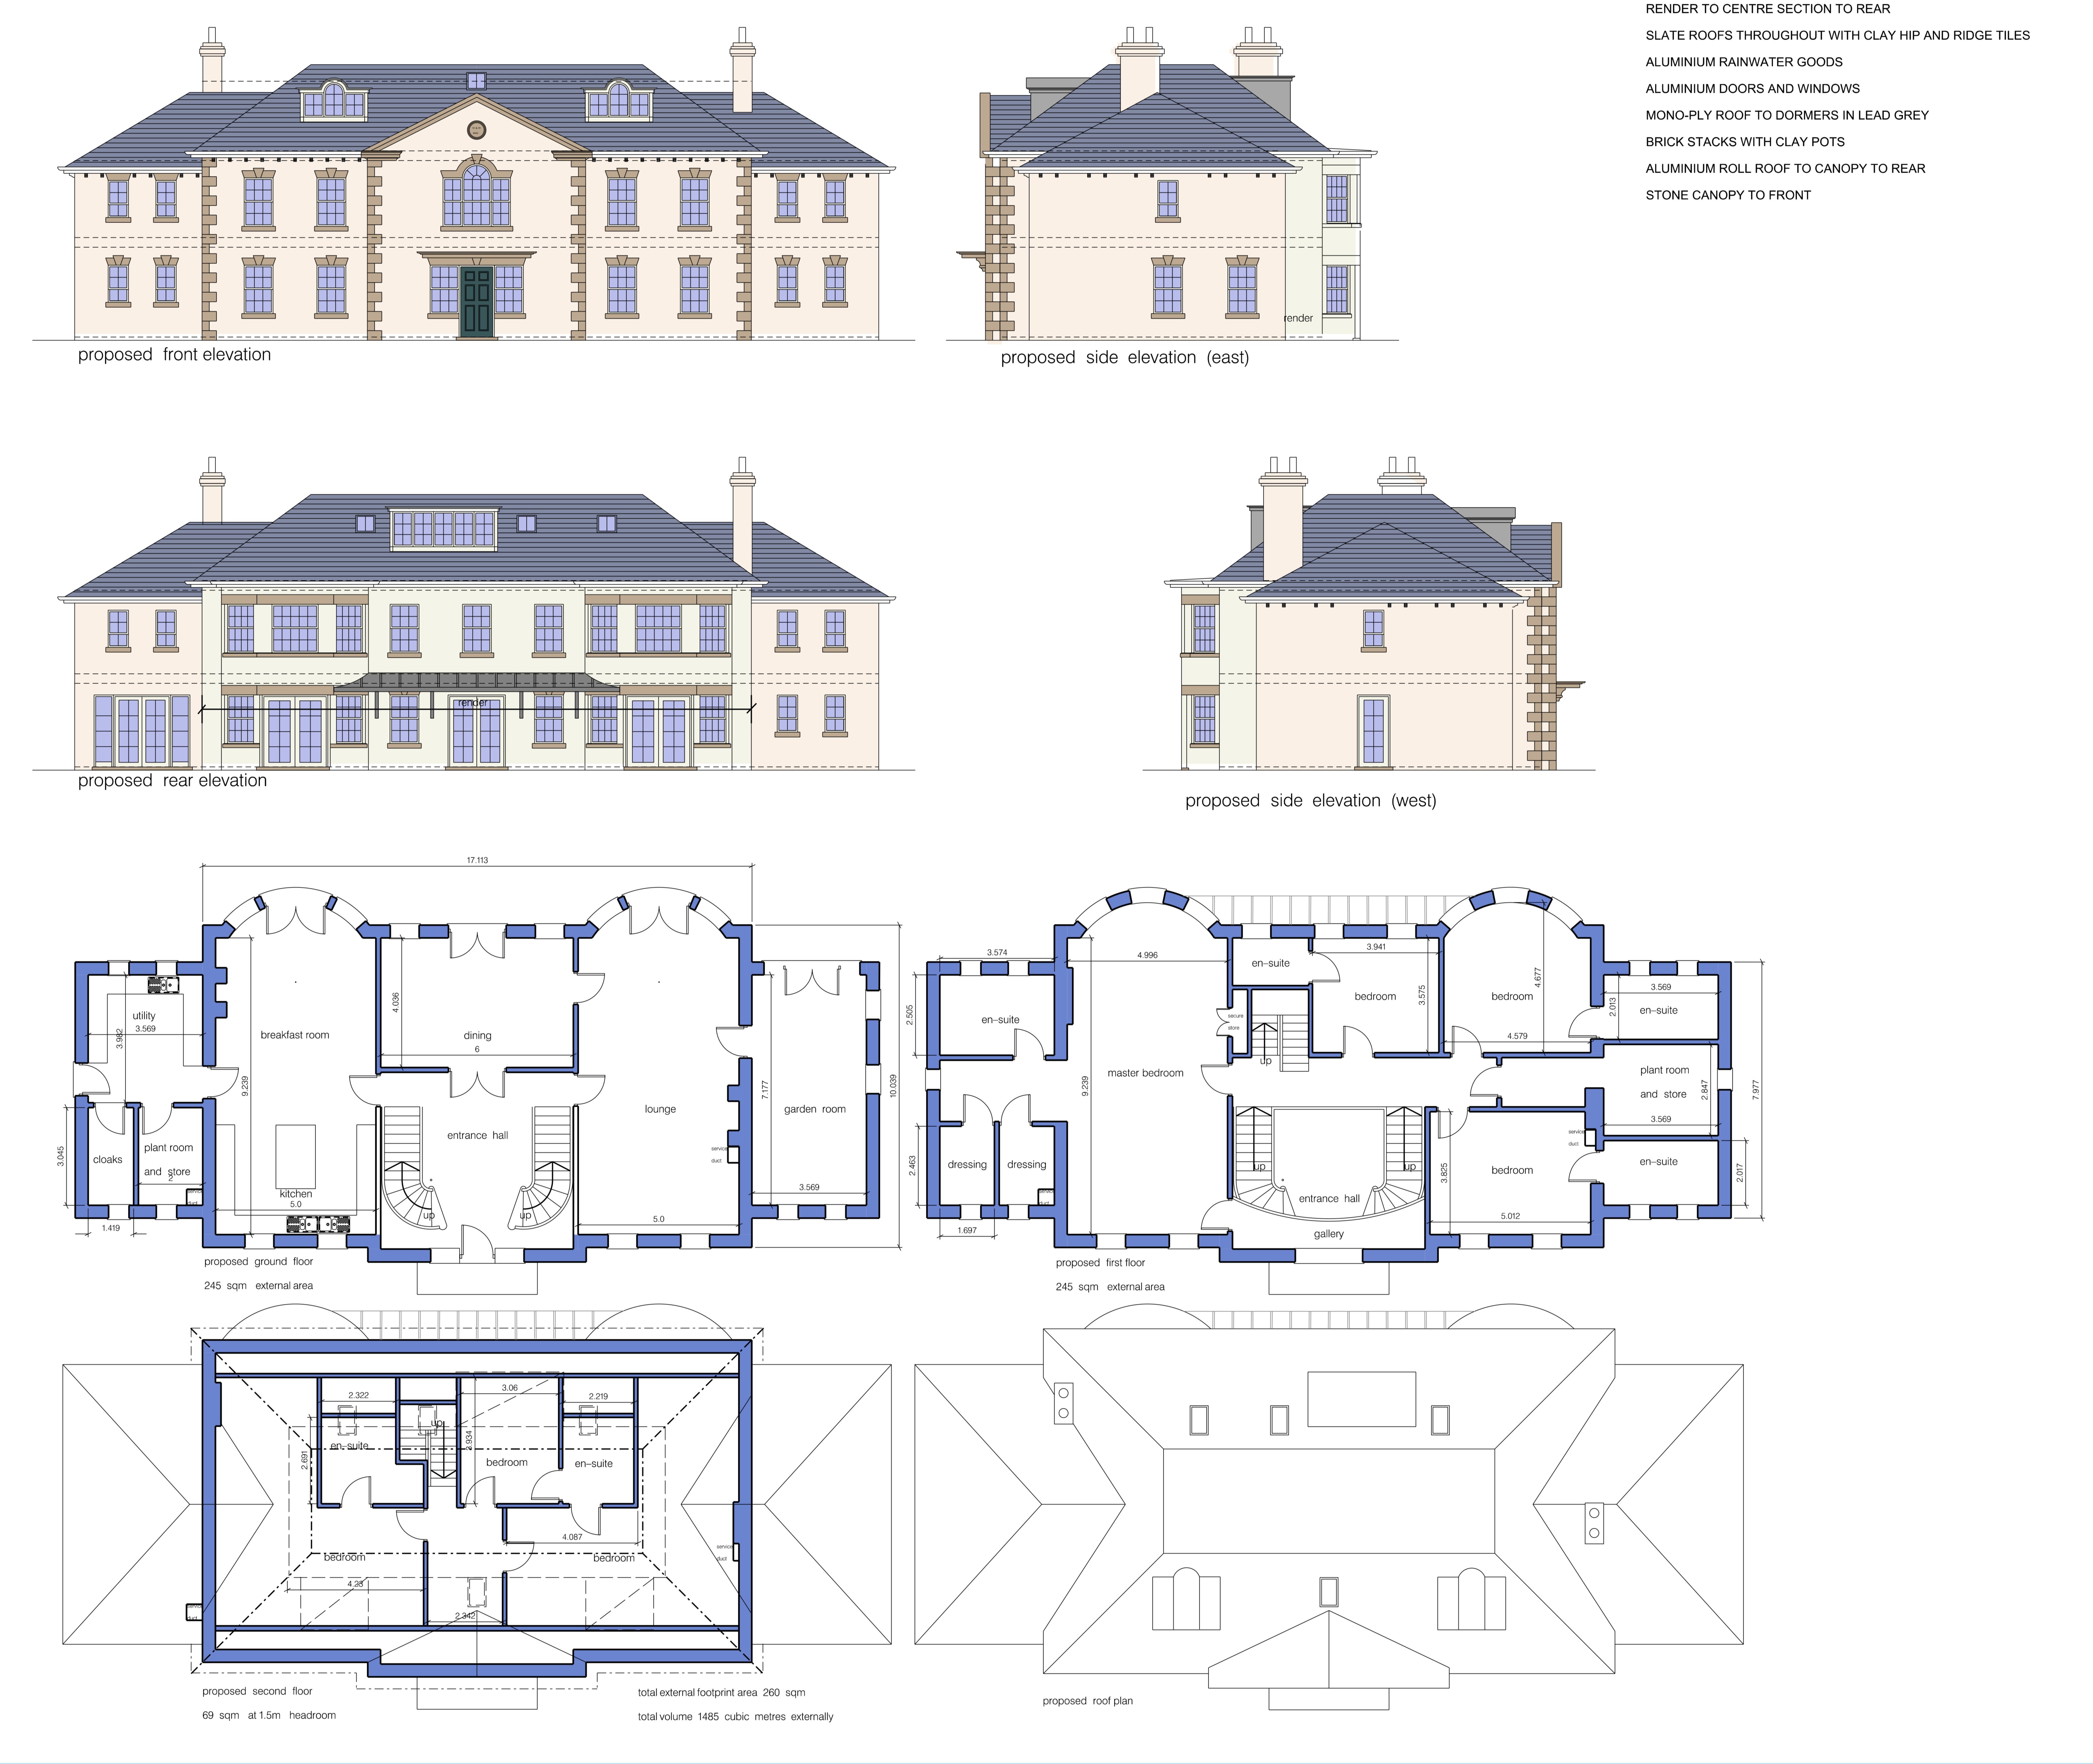 EXCLUSIVE By Ryan Parry TYSON Fury’s plans to knock down a house he’s bought and build a dream £4million mansion have been floored – by bats. The heavyweight world champ wanted to demolish an existing eight-bed pad he’s snapped up in leafy Styal, Cheshire and build a new one complete with a swimming pool. But […]